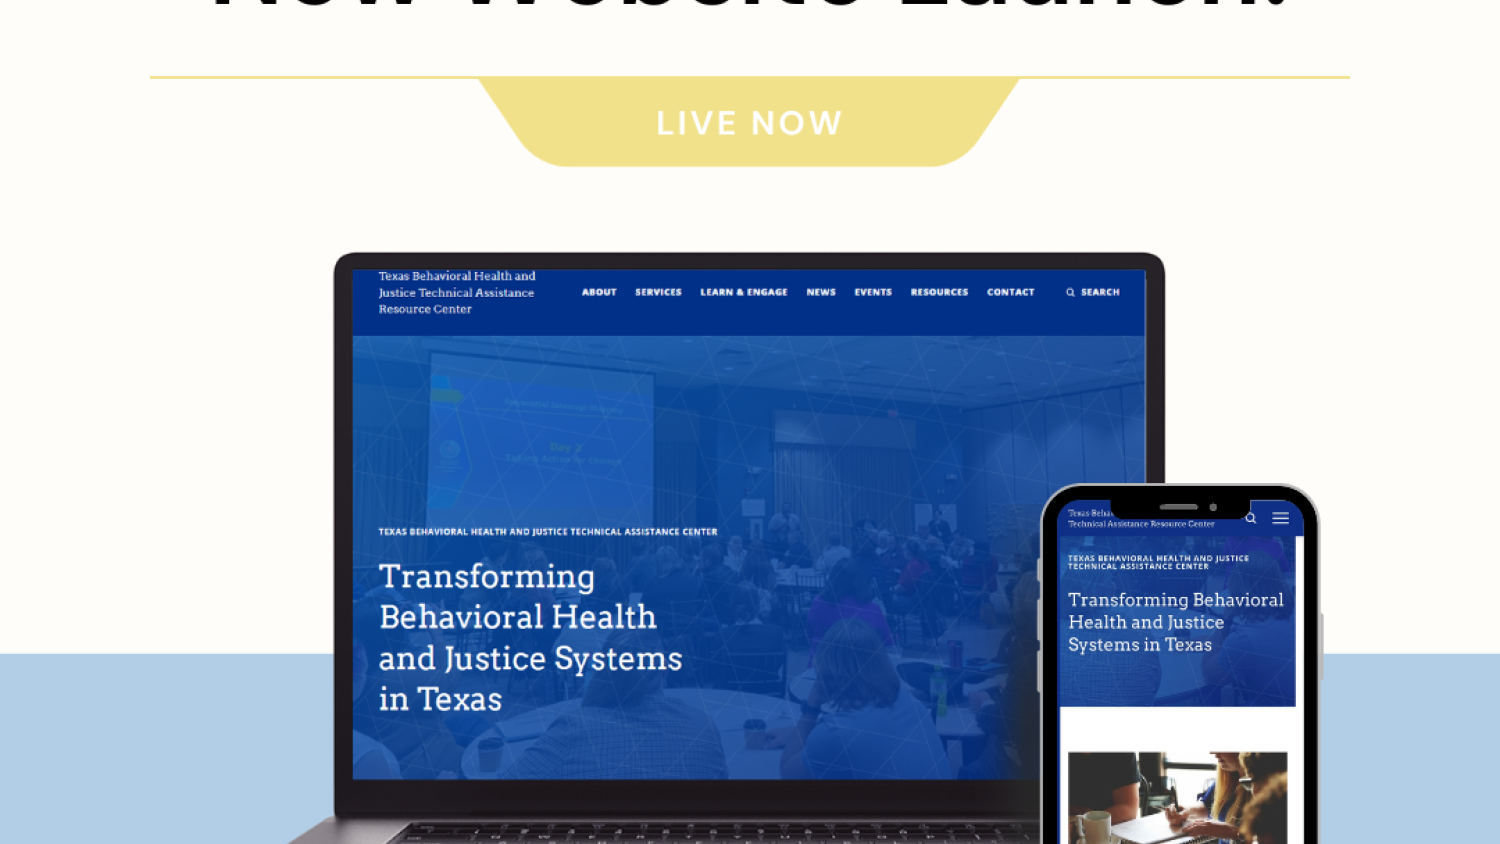 The image represents the launch of the Texas Behavioral Health and Justice Technical Assistance Center website. In the center of the image, a laptop and smartphone are positioned side by side, displaying the home page of the website on their screens. The laptop and smartphone symbolize the accessibility of the website on different devices. At the top of the image, bold white text reads "New Website Launch!" This announcement is accompanied by a yellow tab below it, displaying the words "LIVE NOW," indicating that the website is now available for public access. The image serves as the primary highlight on the News page, showcasing the importance and significance of the TXBHJ Technical Assistance Center's website launch.